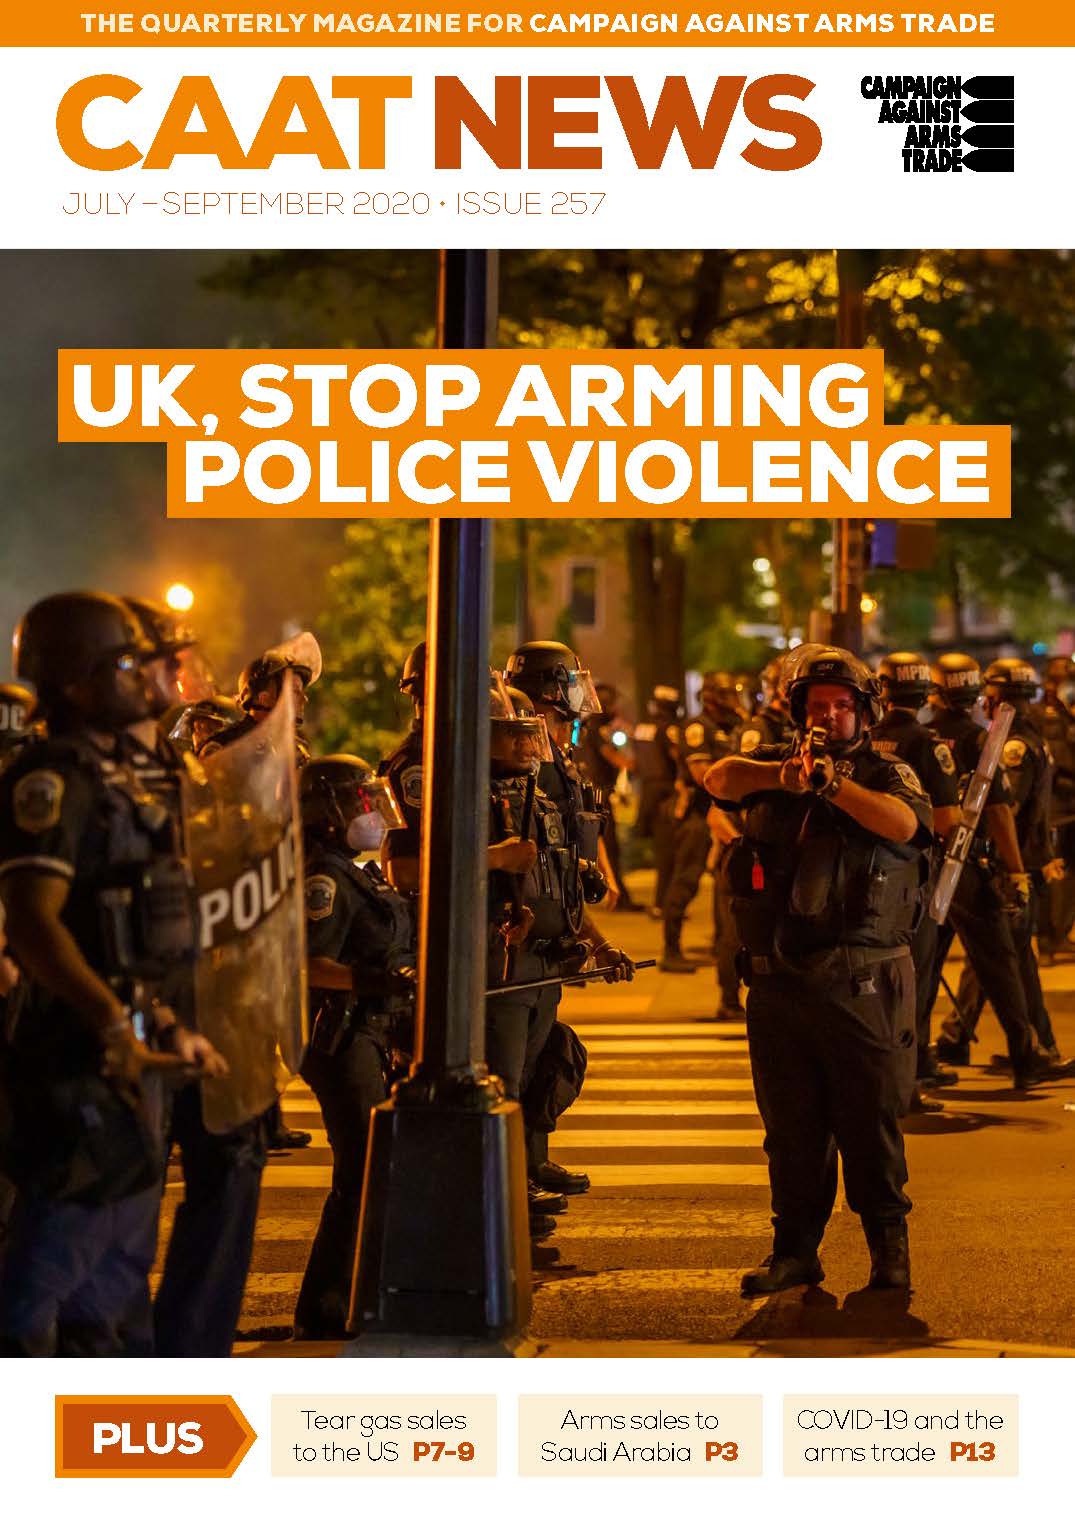 Cover of CAAT News issue 257 with image of police and headline "UK, stop arming police violence"